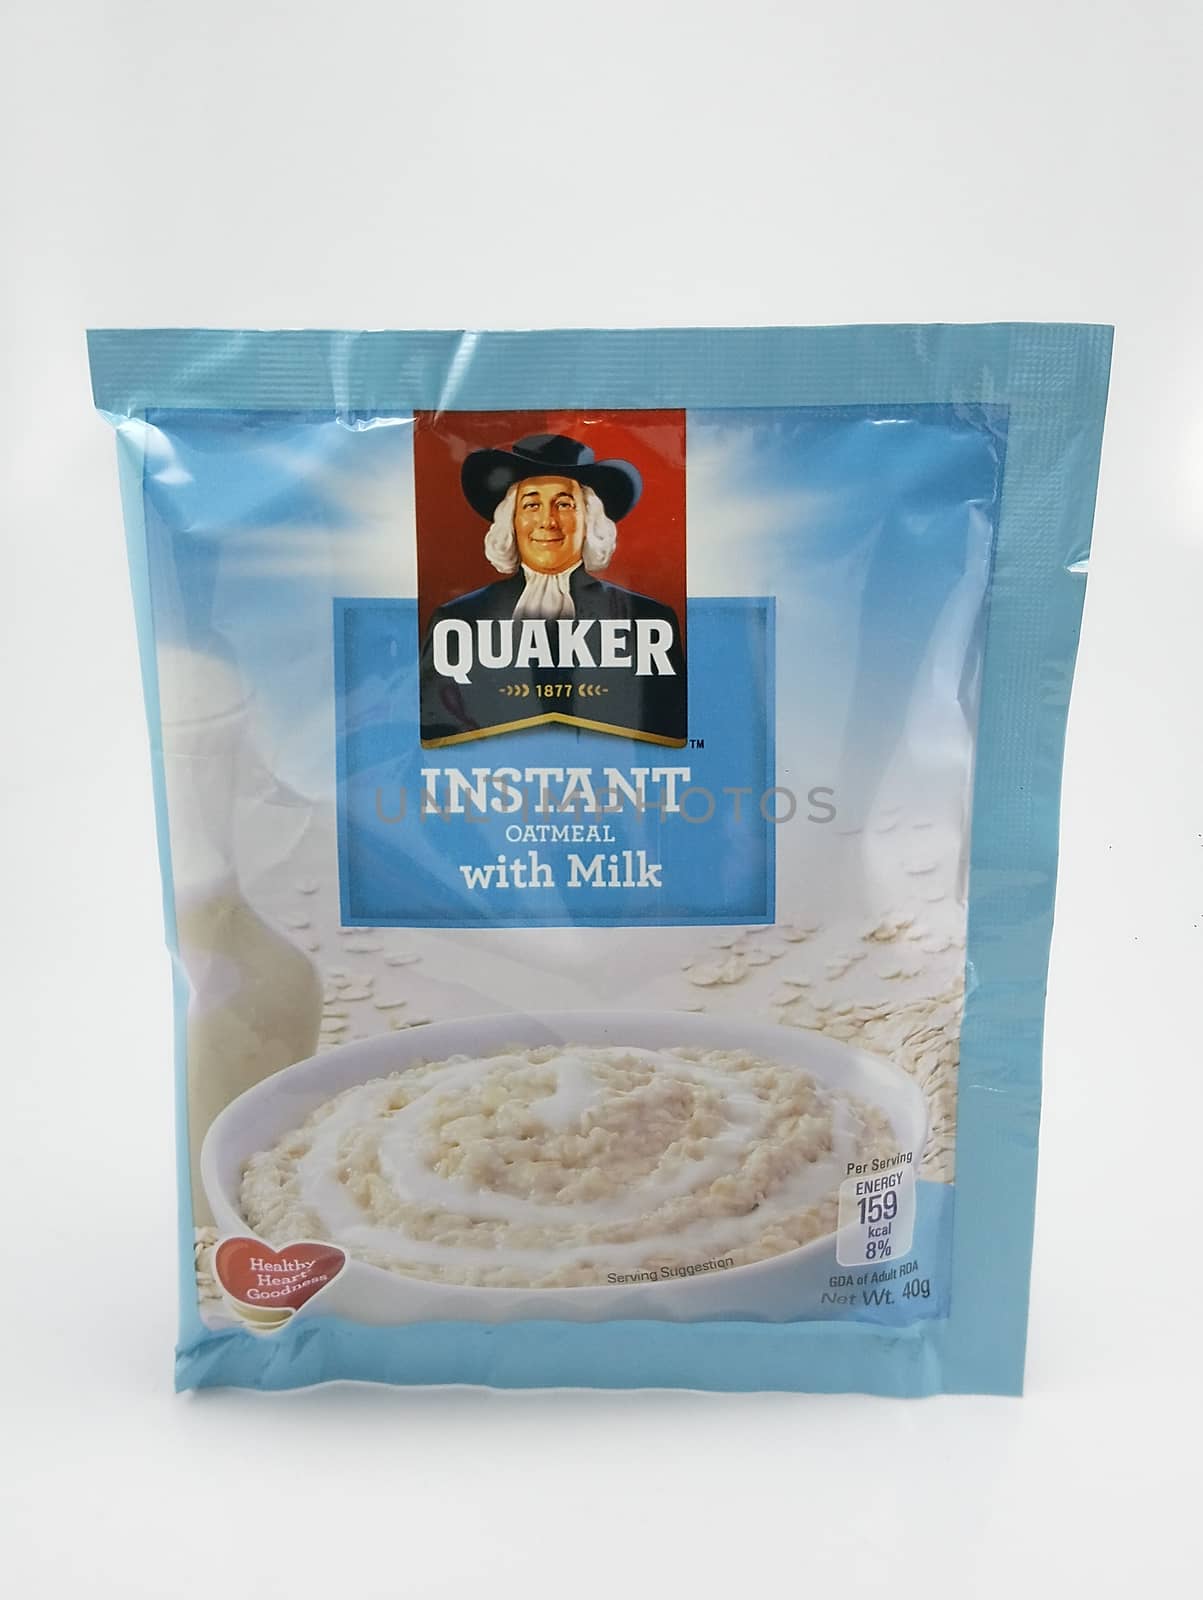  Quaker instant oatmeal with milk in Manila, Philippines by imwaltersy